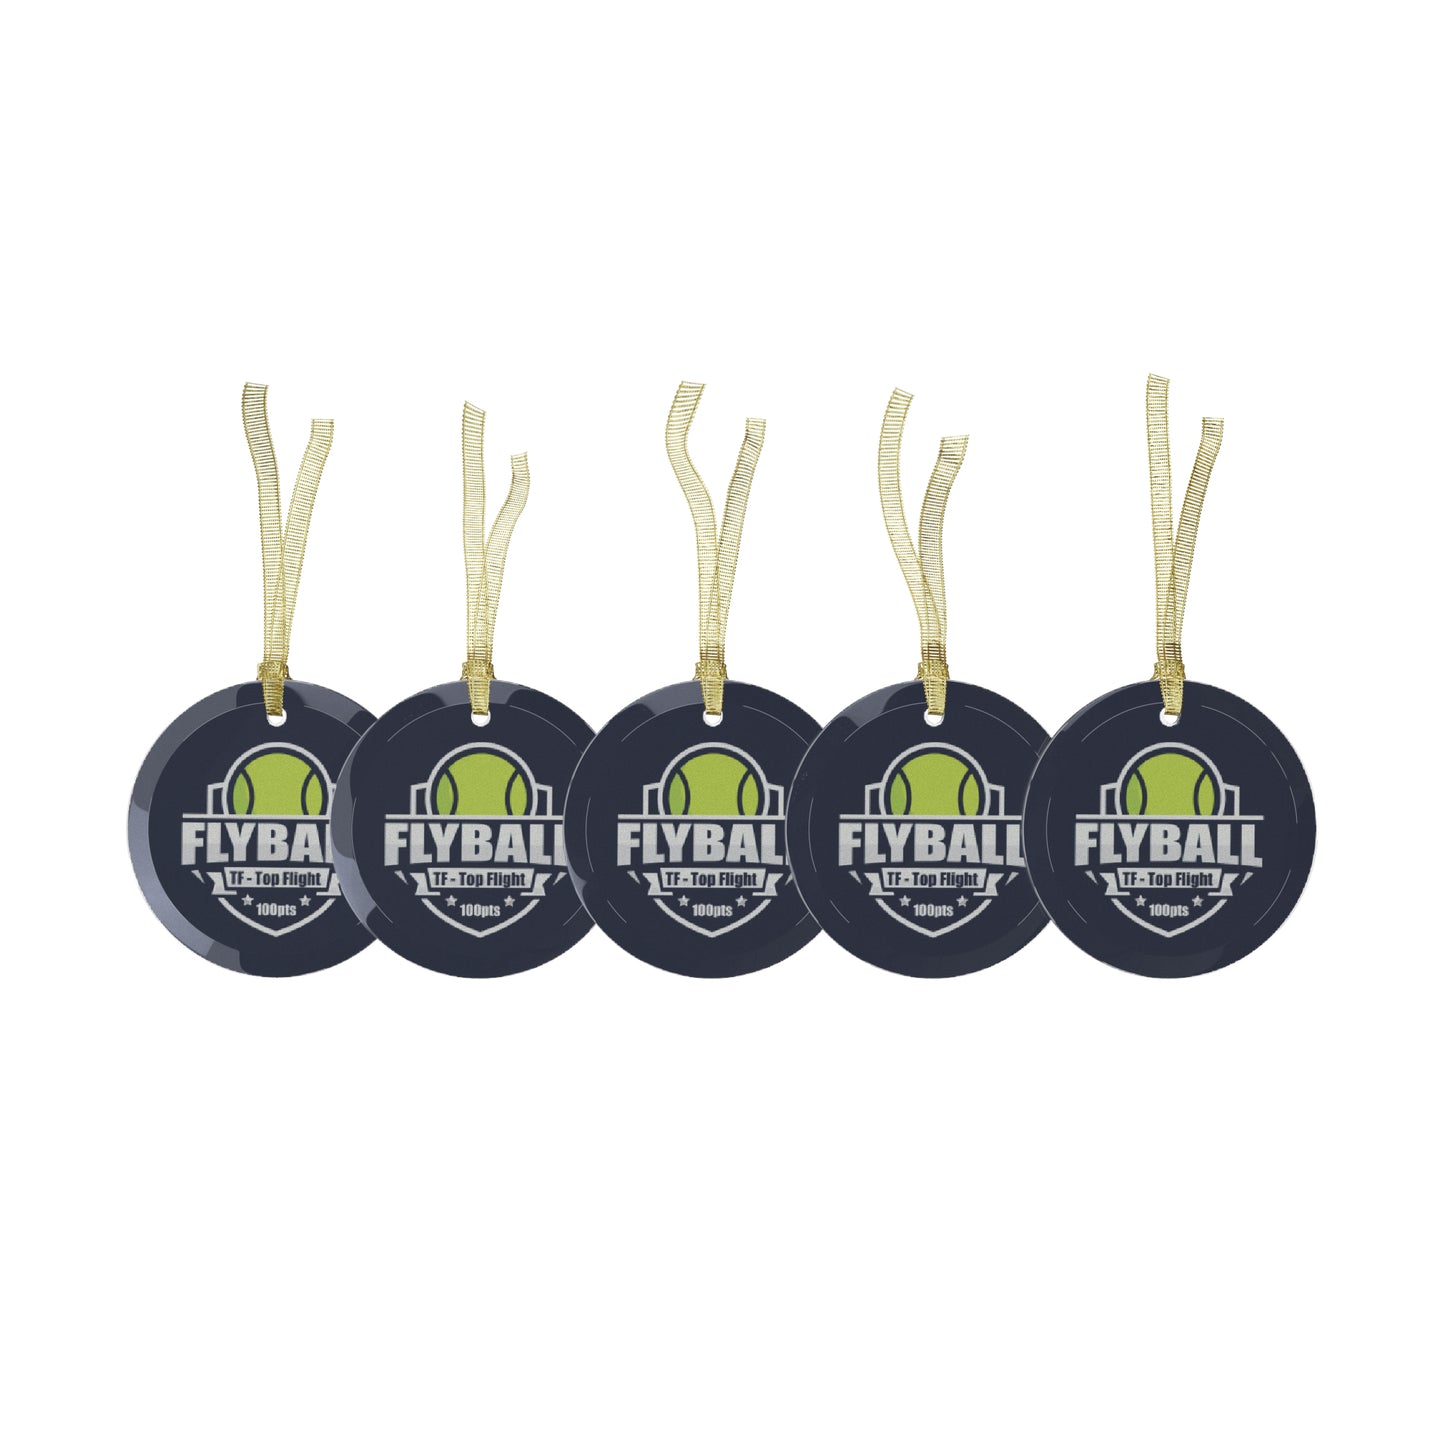 FLYBALL TITLE Glass Ornament Bundles